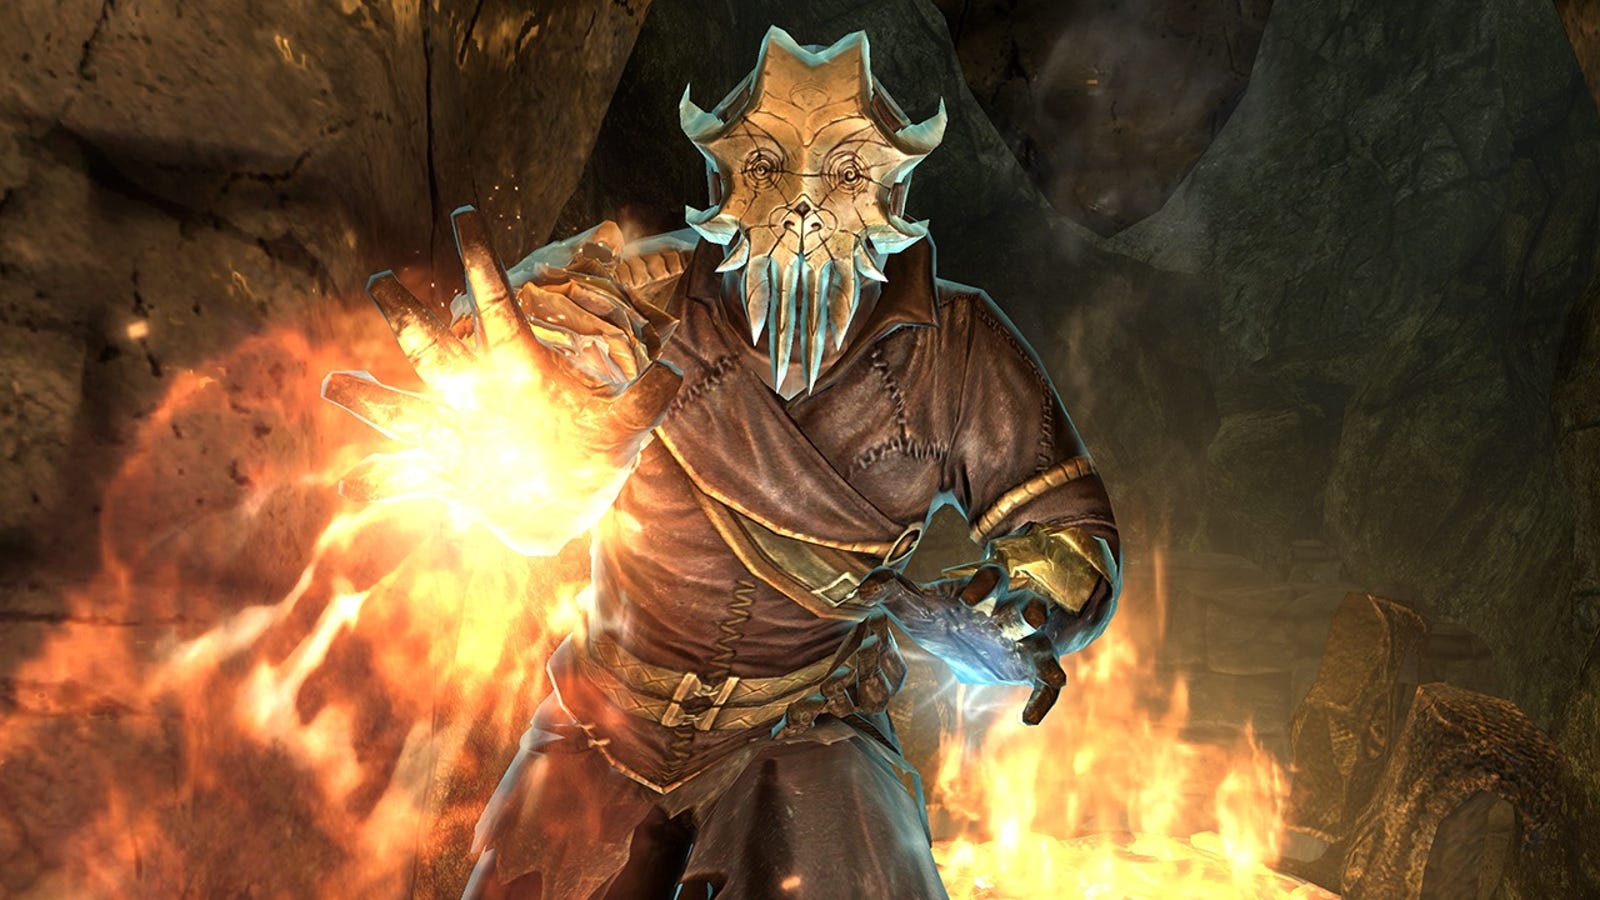 Skyrims Dragonborn Dlc Will Bring Players Back To Morrowind Sort Of 